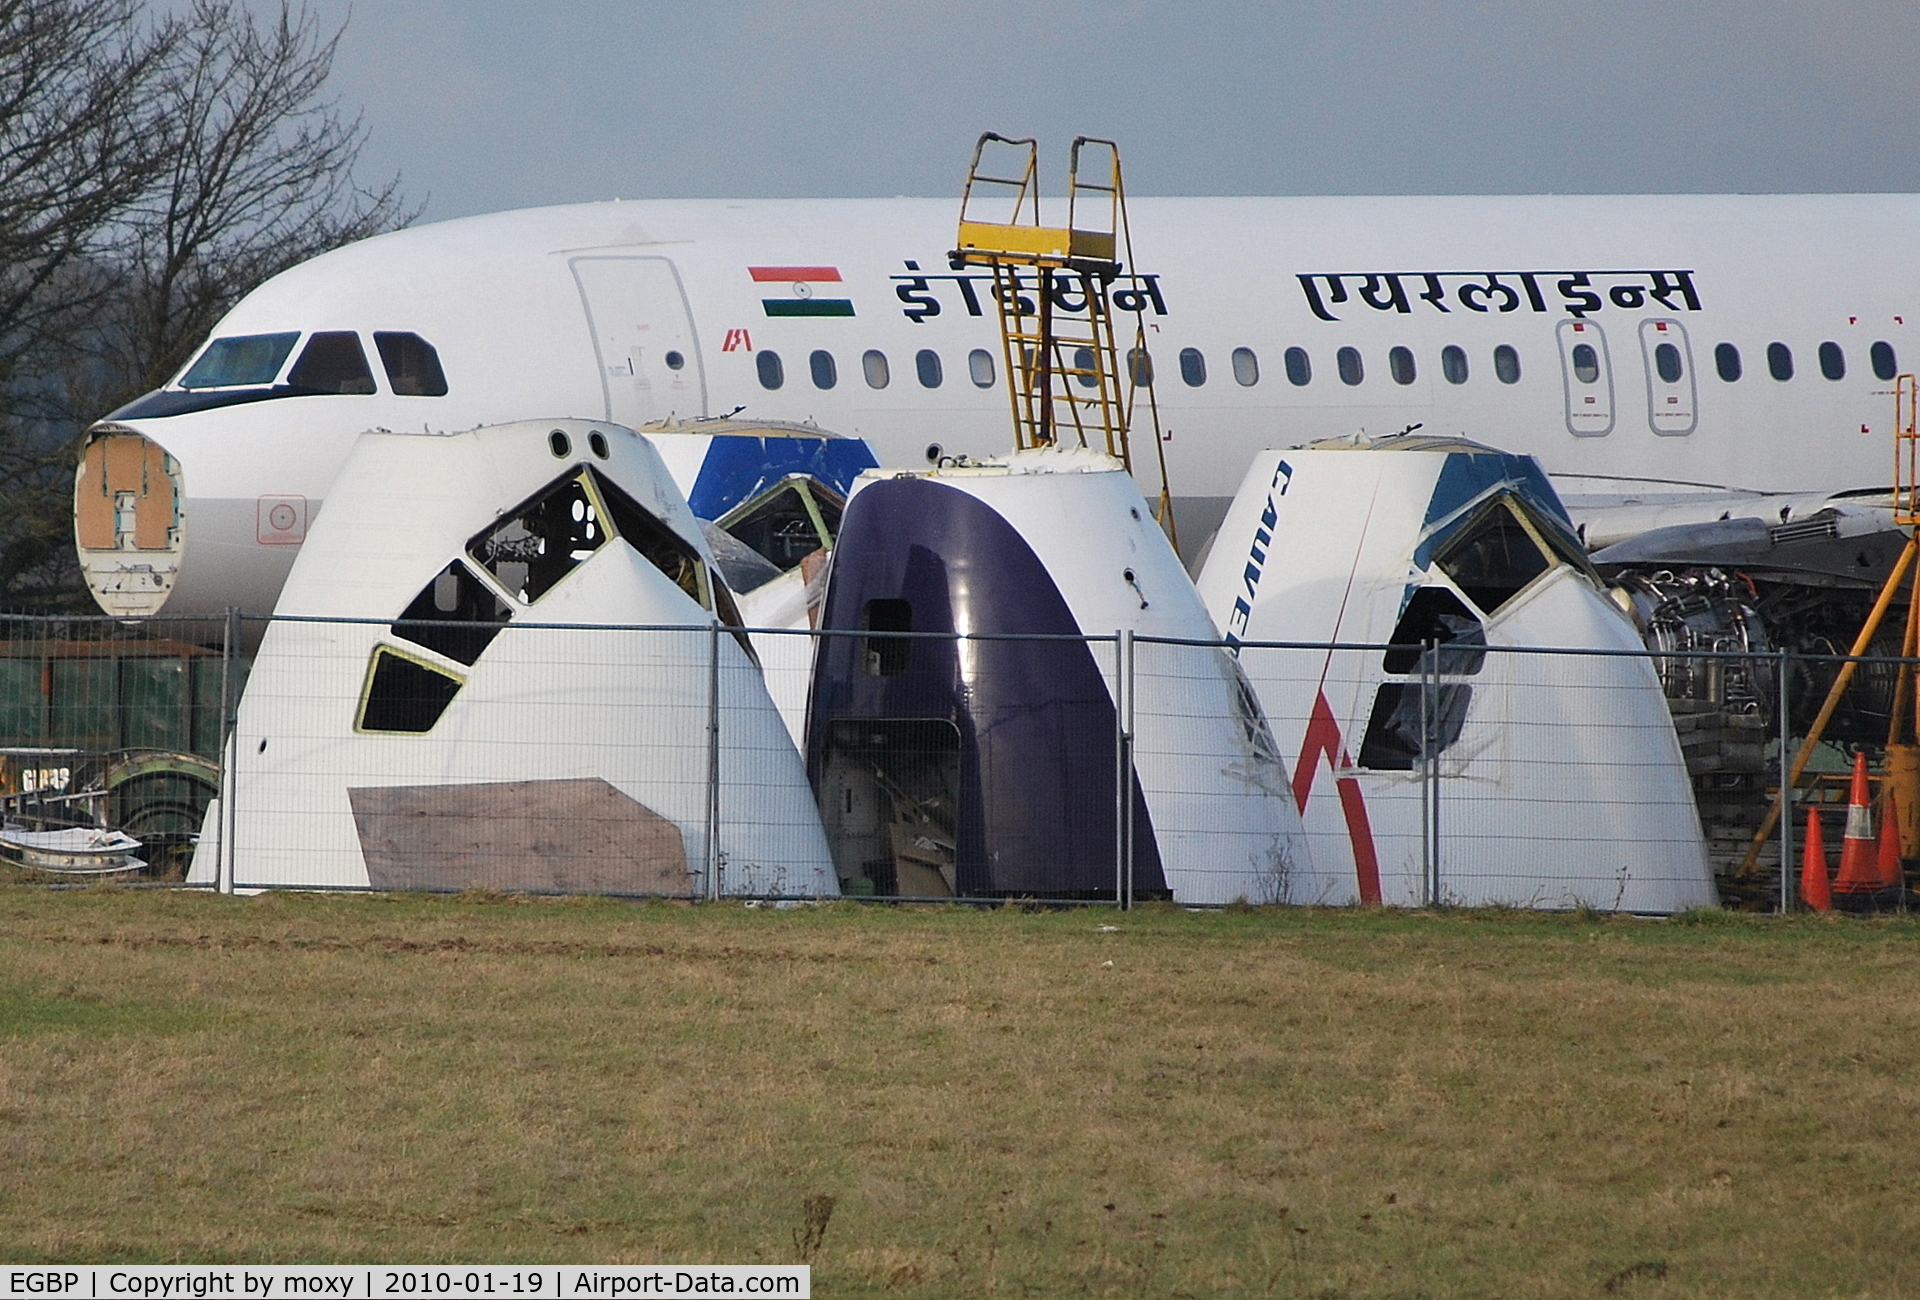 Kemble Airport, Kemble, England United Kingdom (EGBP) - Assorted noses in front of VT-EYF, Indian Airlines A320 